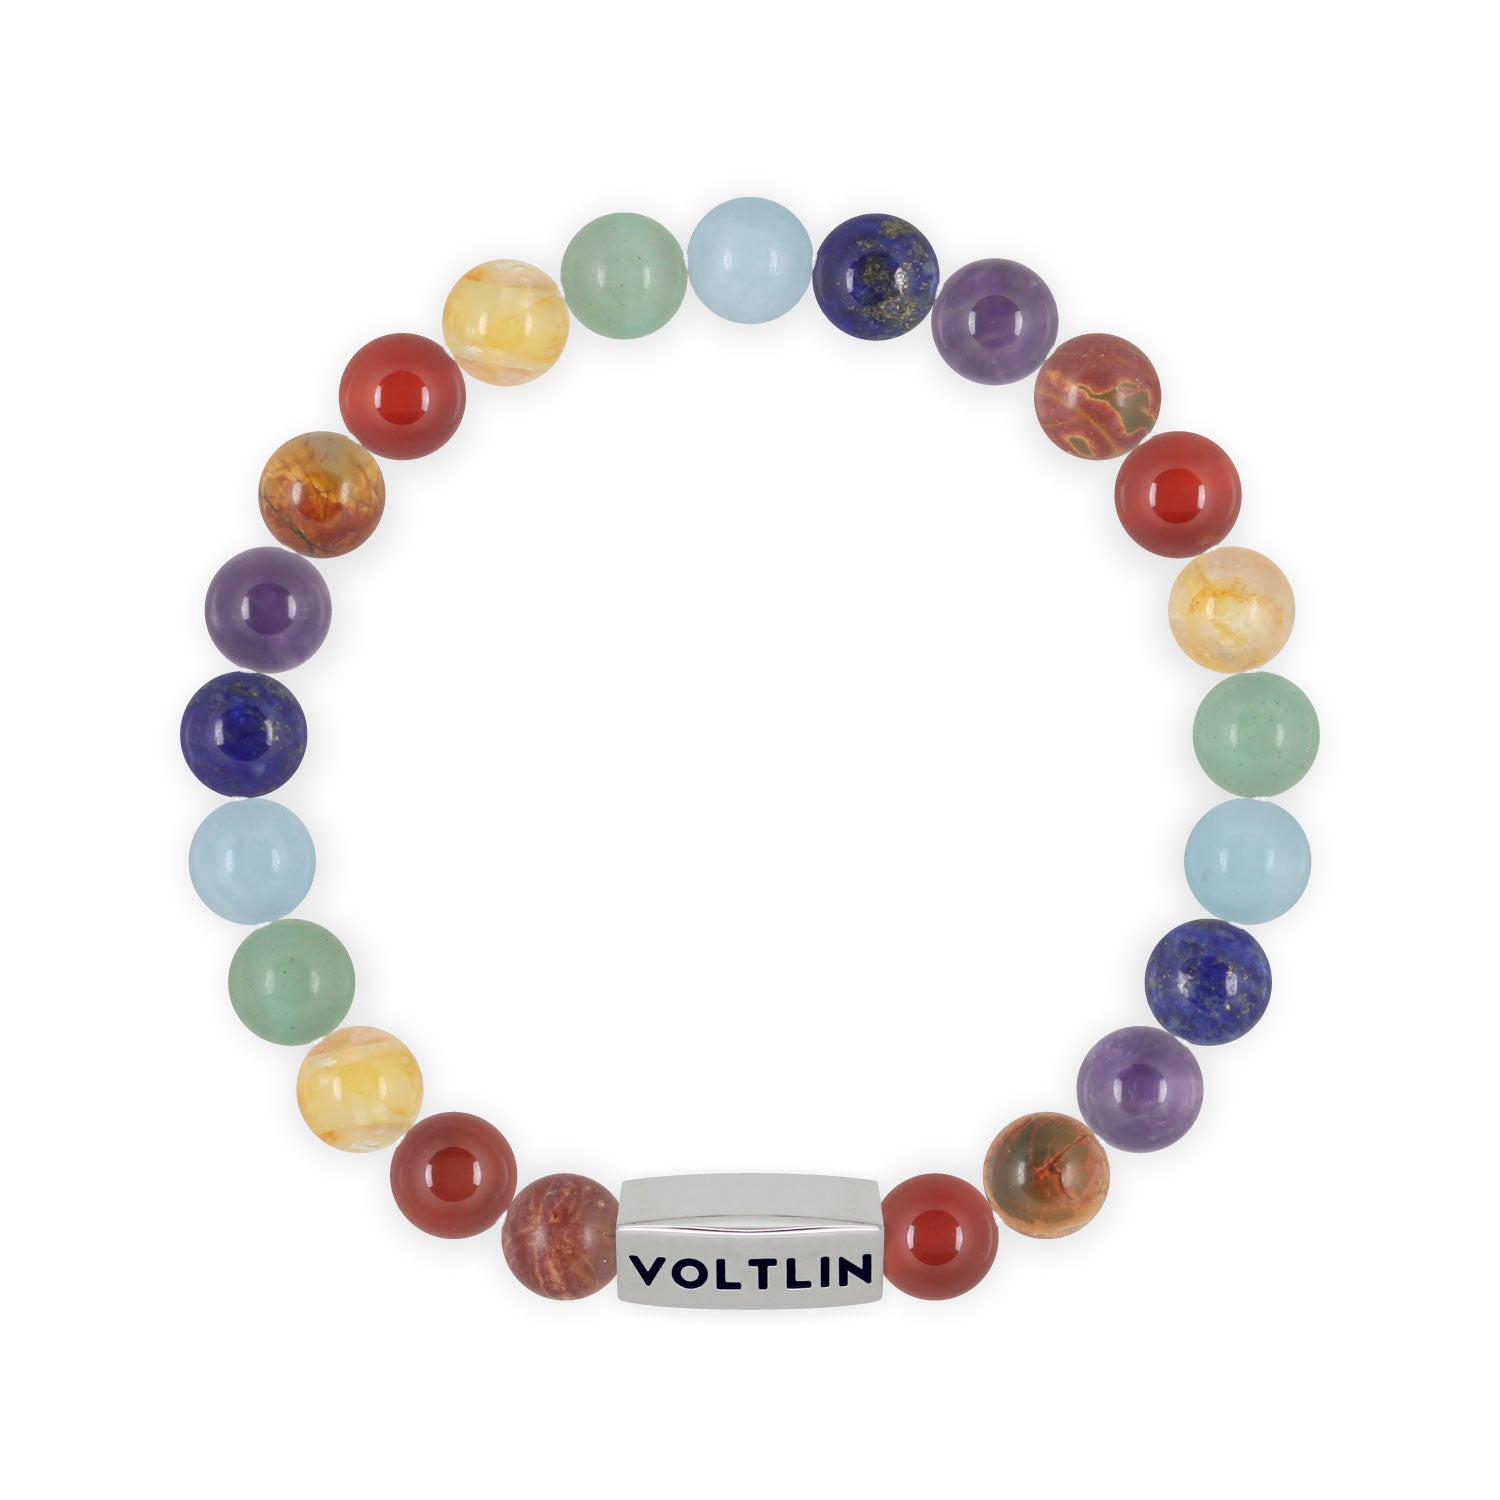 Front view of an 8mm 7 Chakra beaded stretch bracelet featuring Red Creek Jasper, Carnelian, Citrine, Green Aventurine, Aquamarine, Lapis Lazuli, & Amethyst crystal and silver stainless steel logo bead made by Voltlin